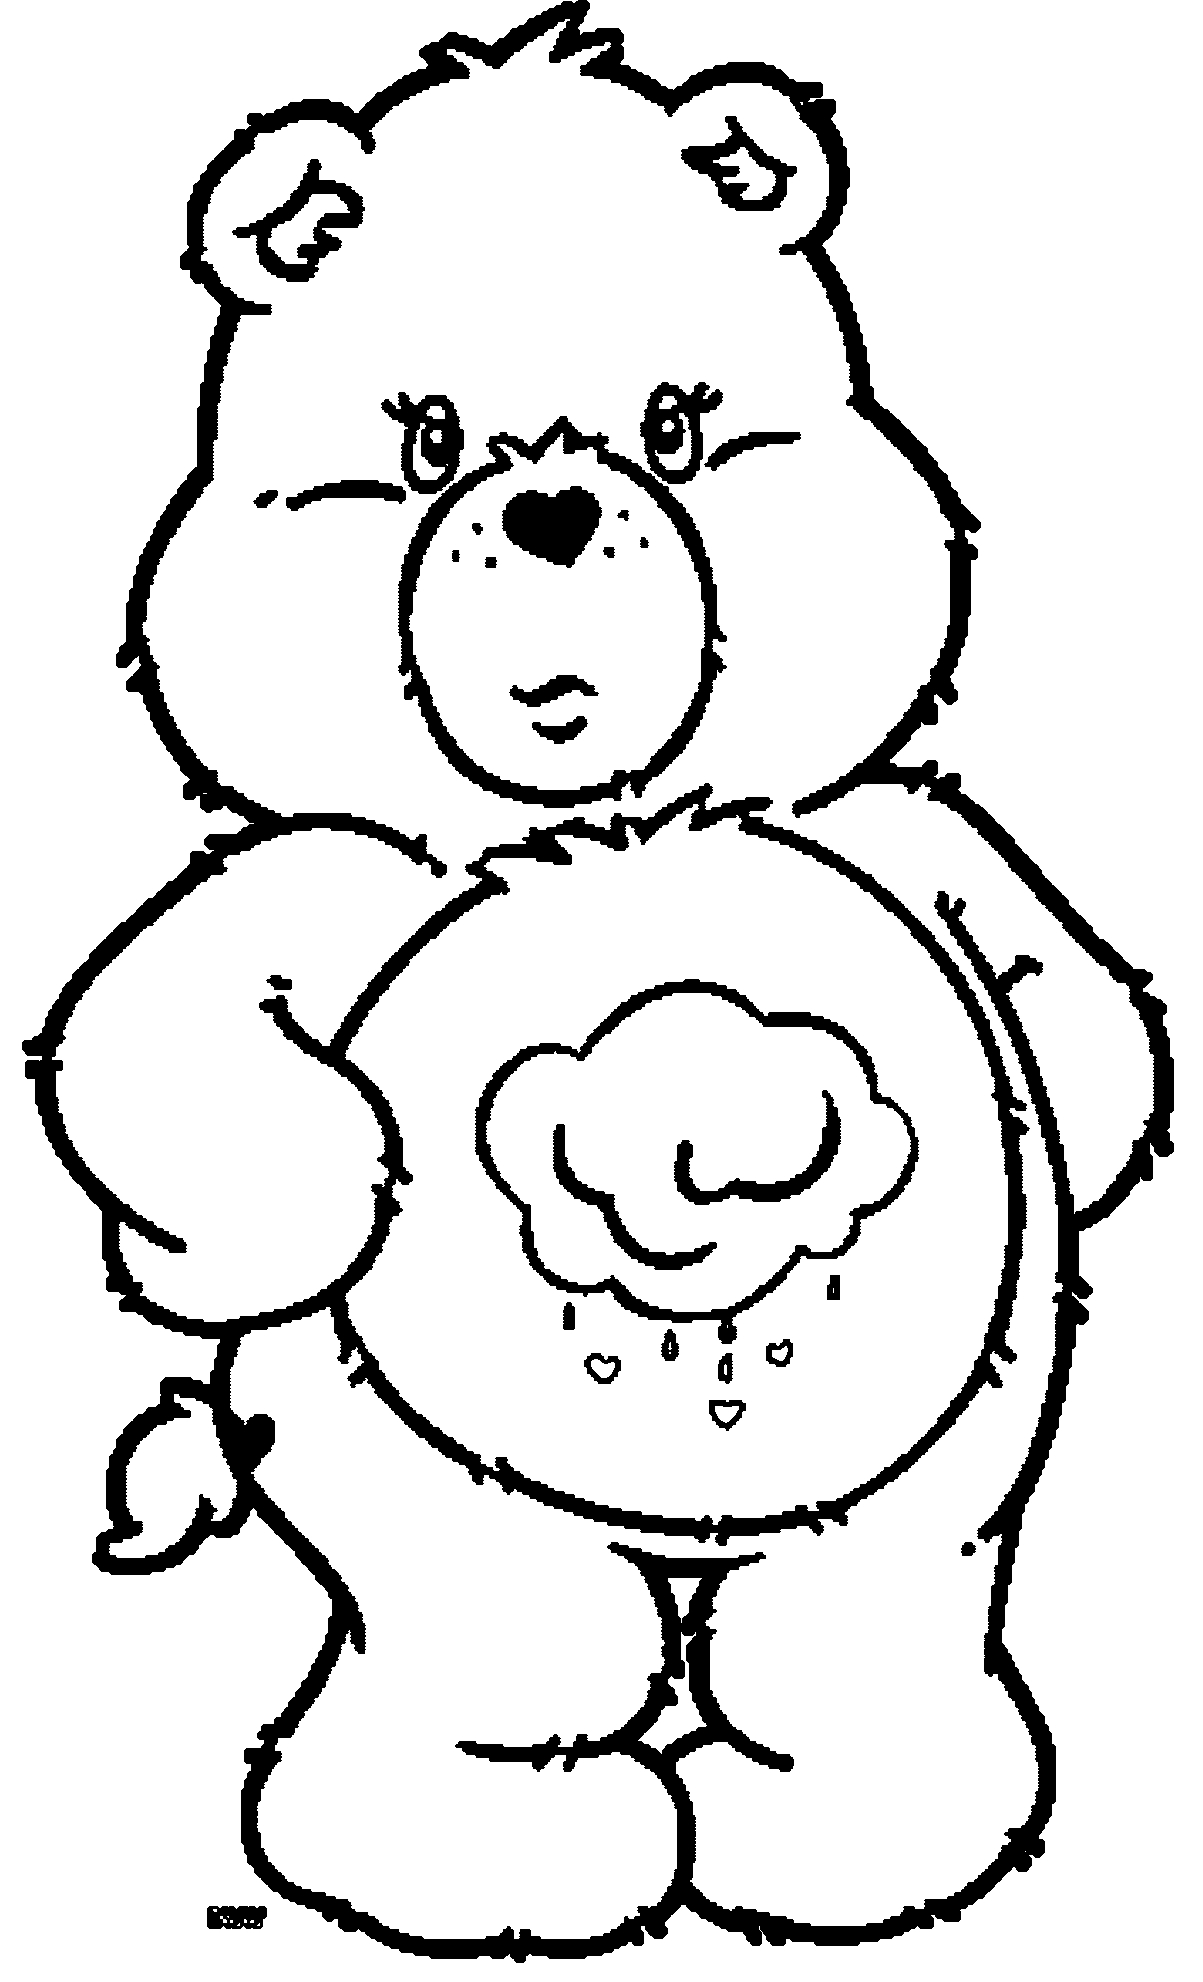 Free Care Bear Coloring Pages Care Bear Coloring Pages Coloringsuitecom Free Care Bear Coloring